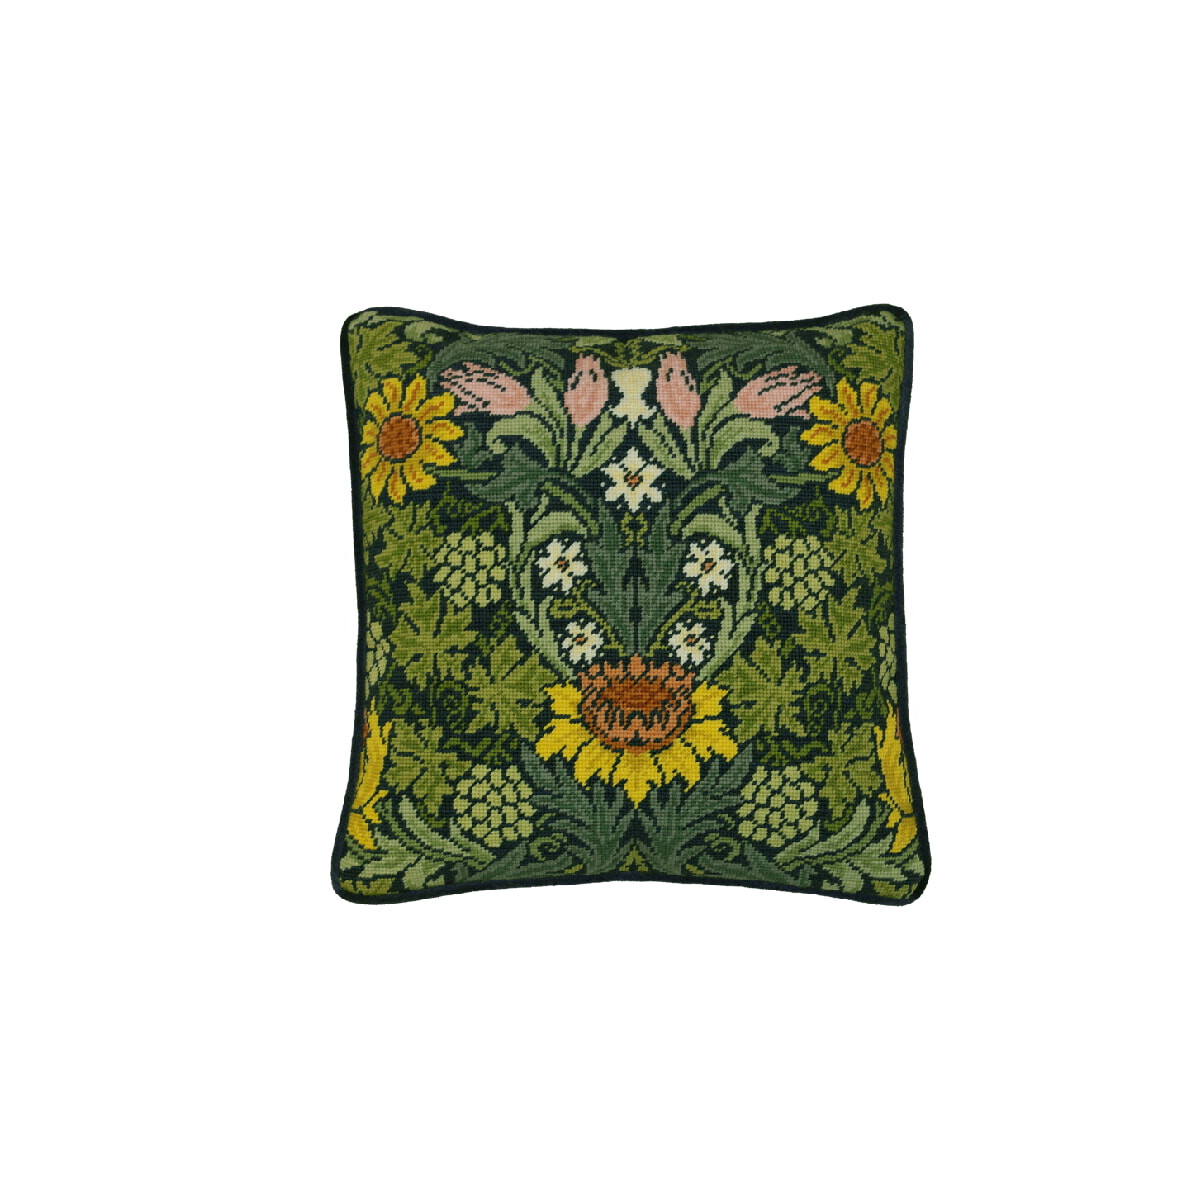 Square decorative cushion with an intricate cross-stitch...